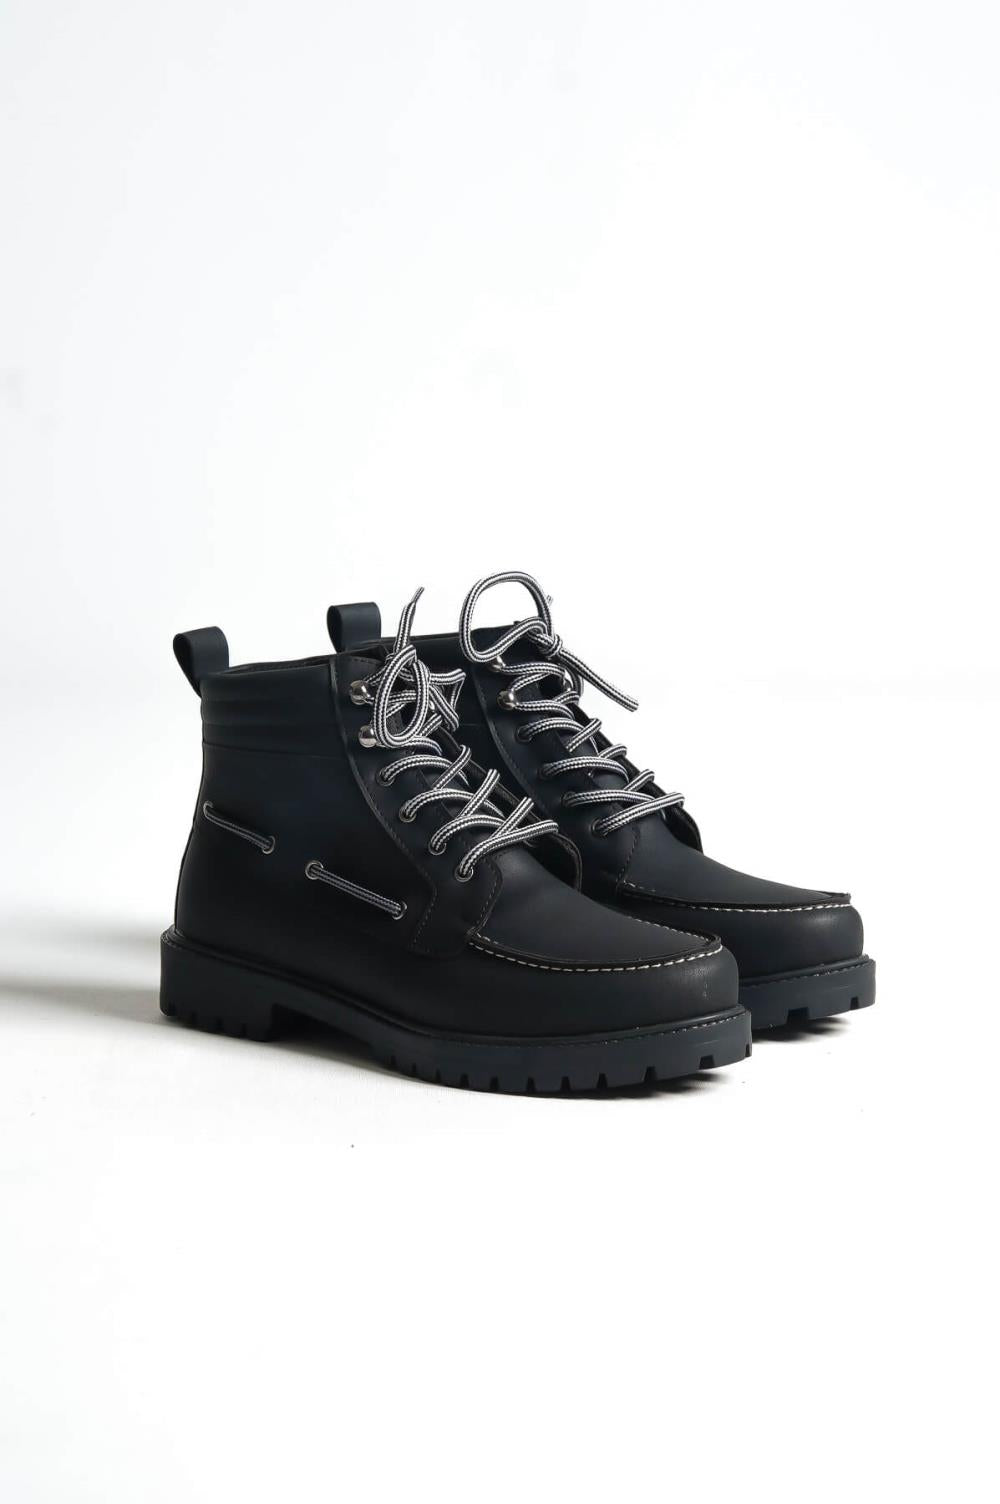 High-Sole Shoes B-020 Black (Black Sole) - STREETMODE ™